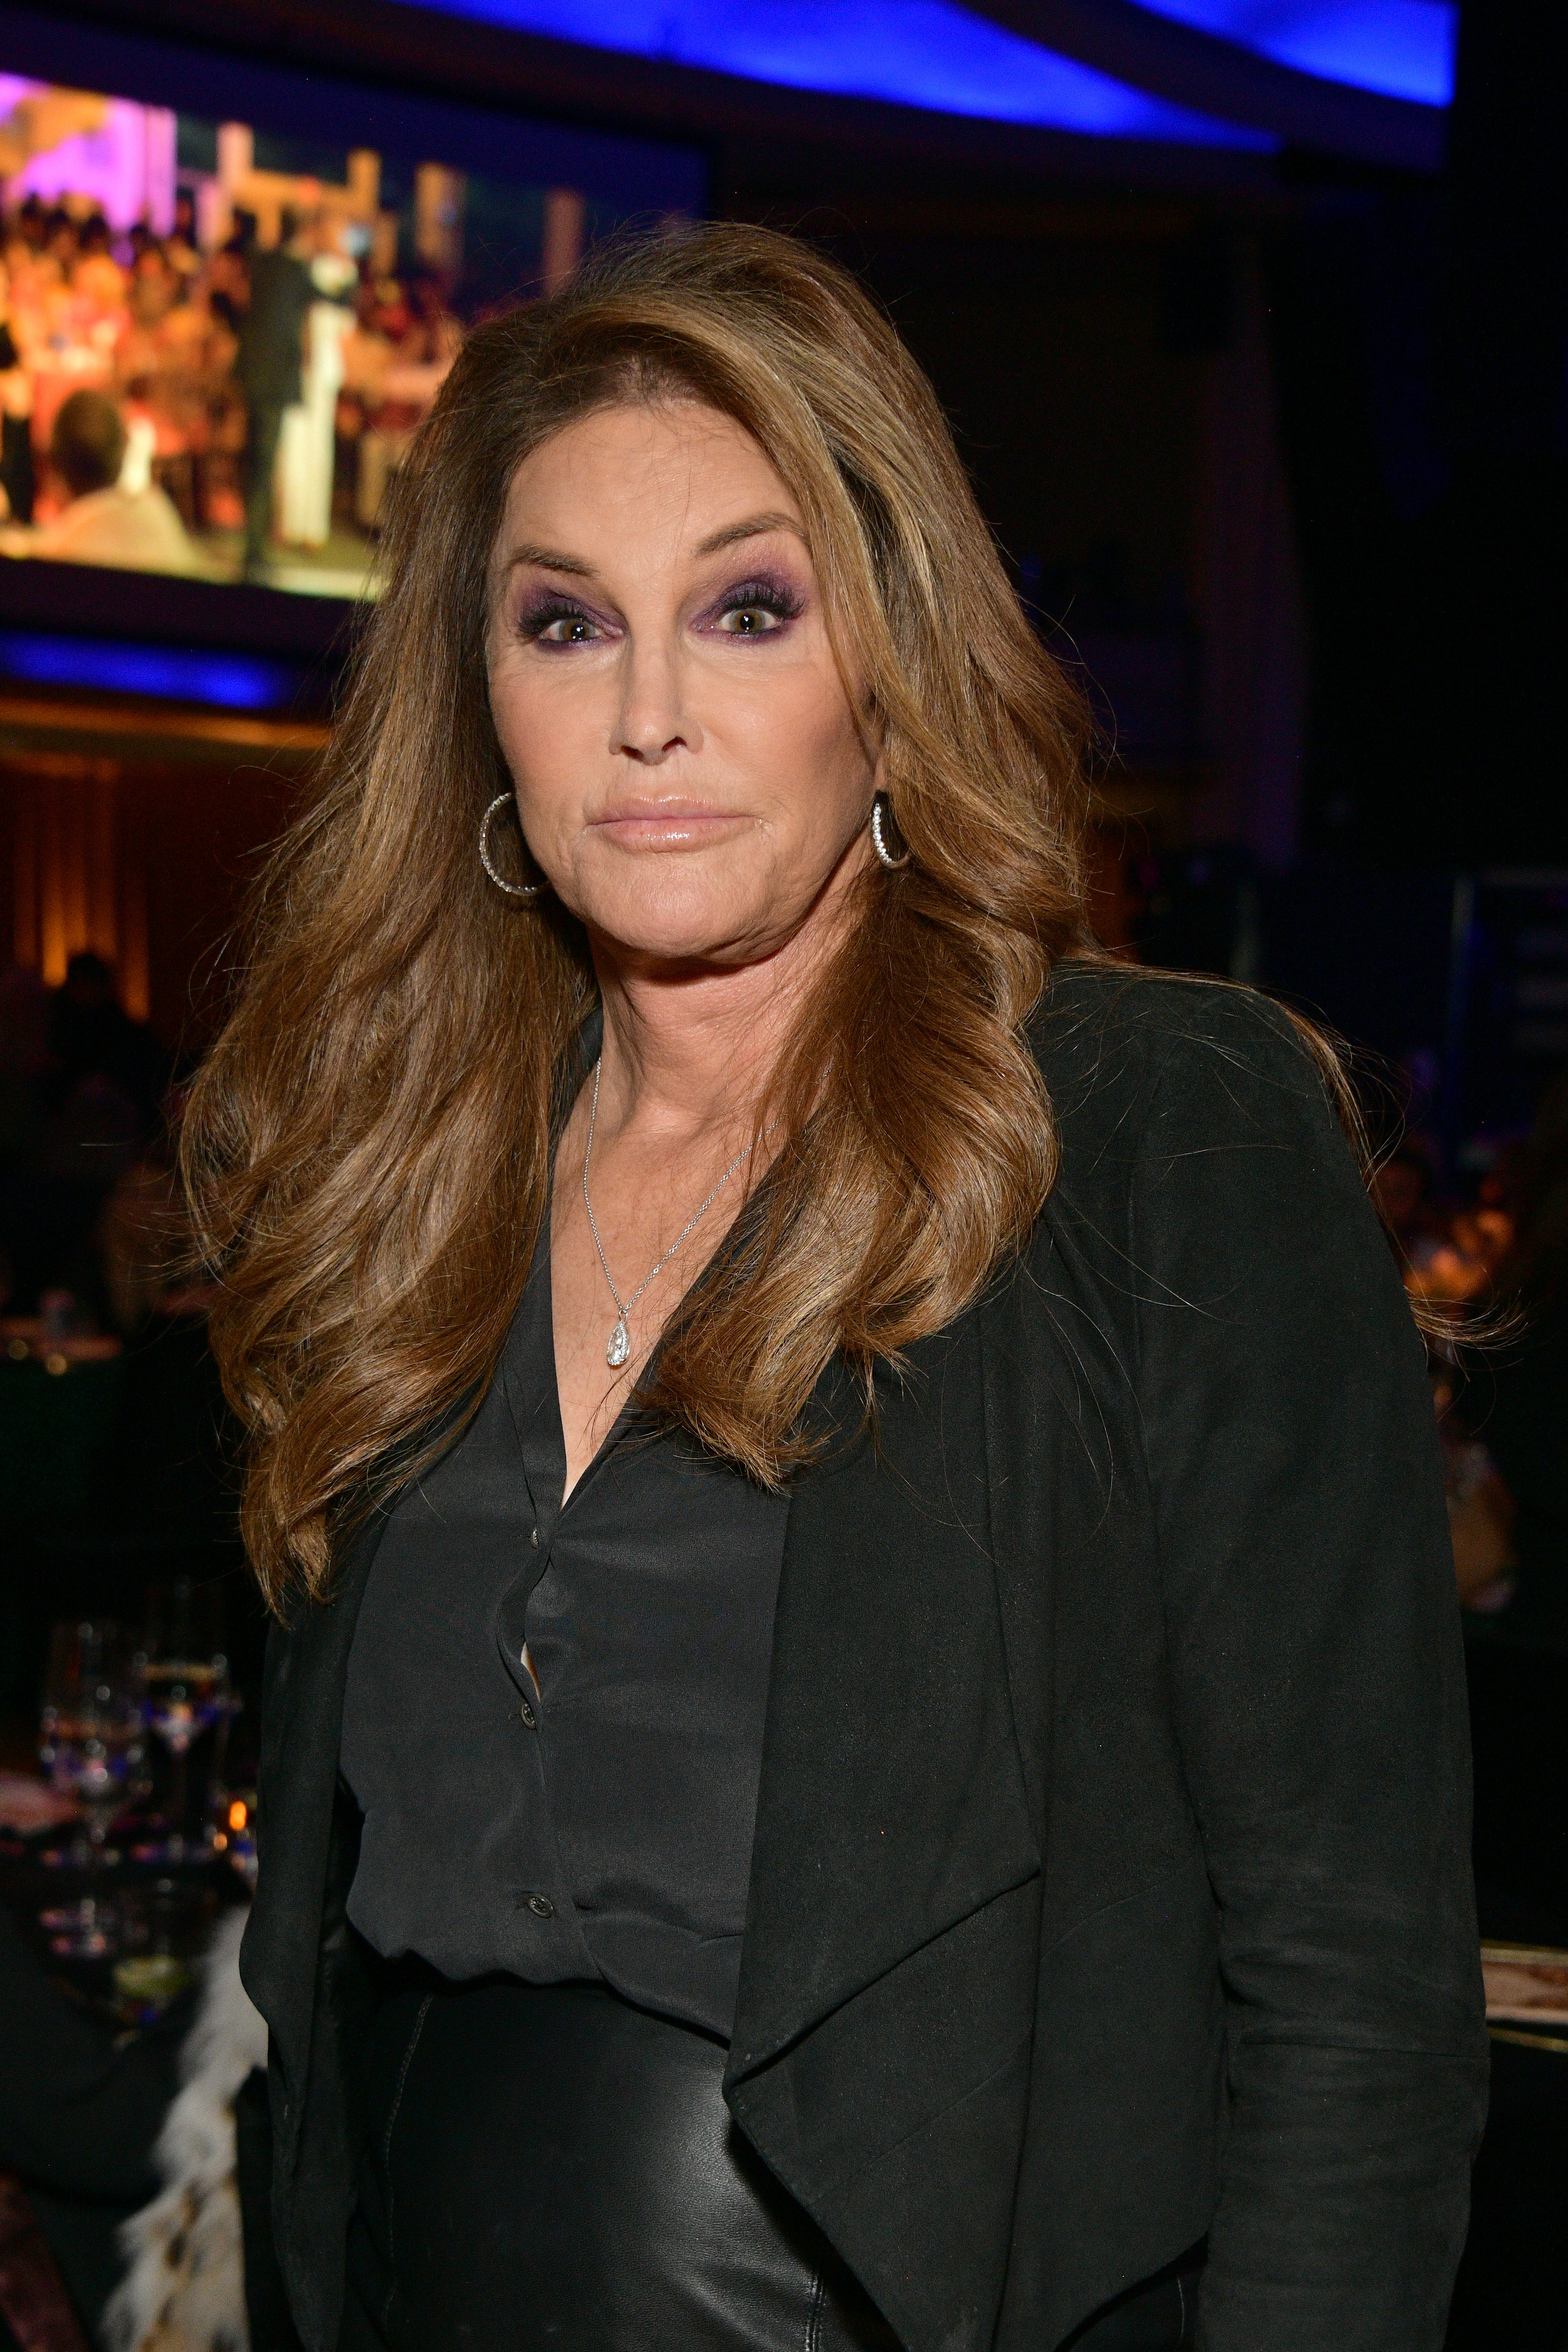 Caitlyn Jenner attends the Steven Tyler&#x27;s 4th Annual GRAMMY Awards® Viewing Party Benefitting Janie&#x27;s Fund Sponsored By Cincoro Tequila at Hollywood Palladium